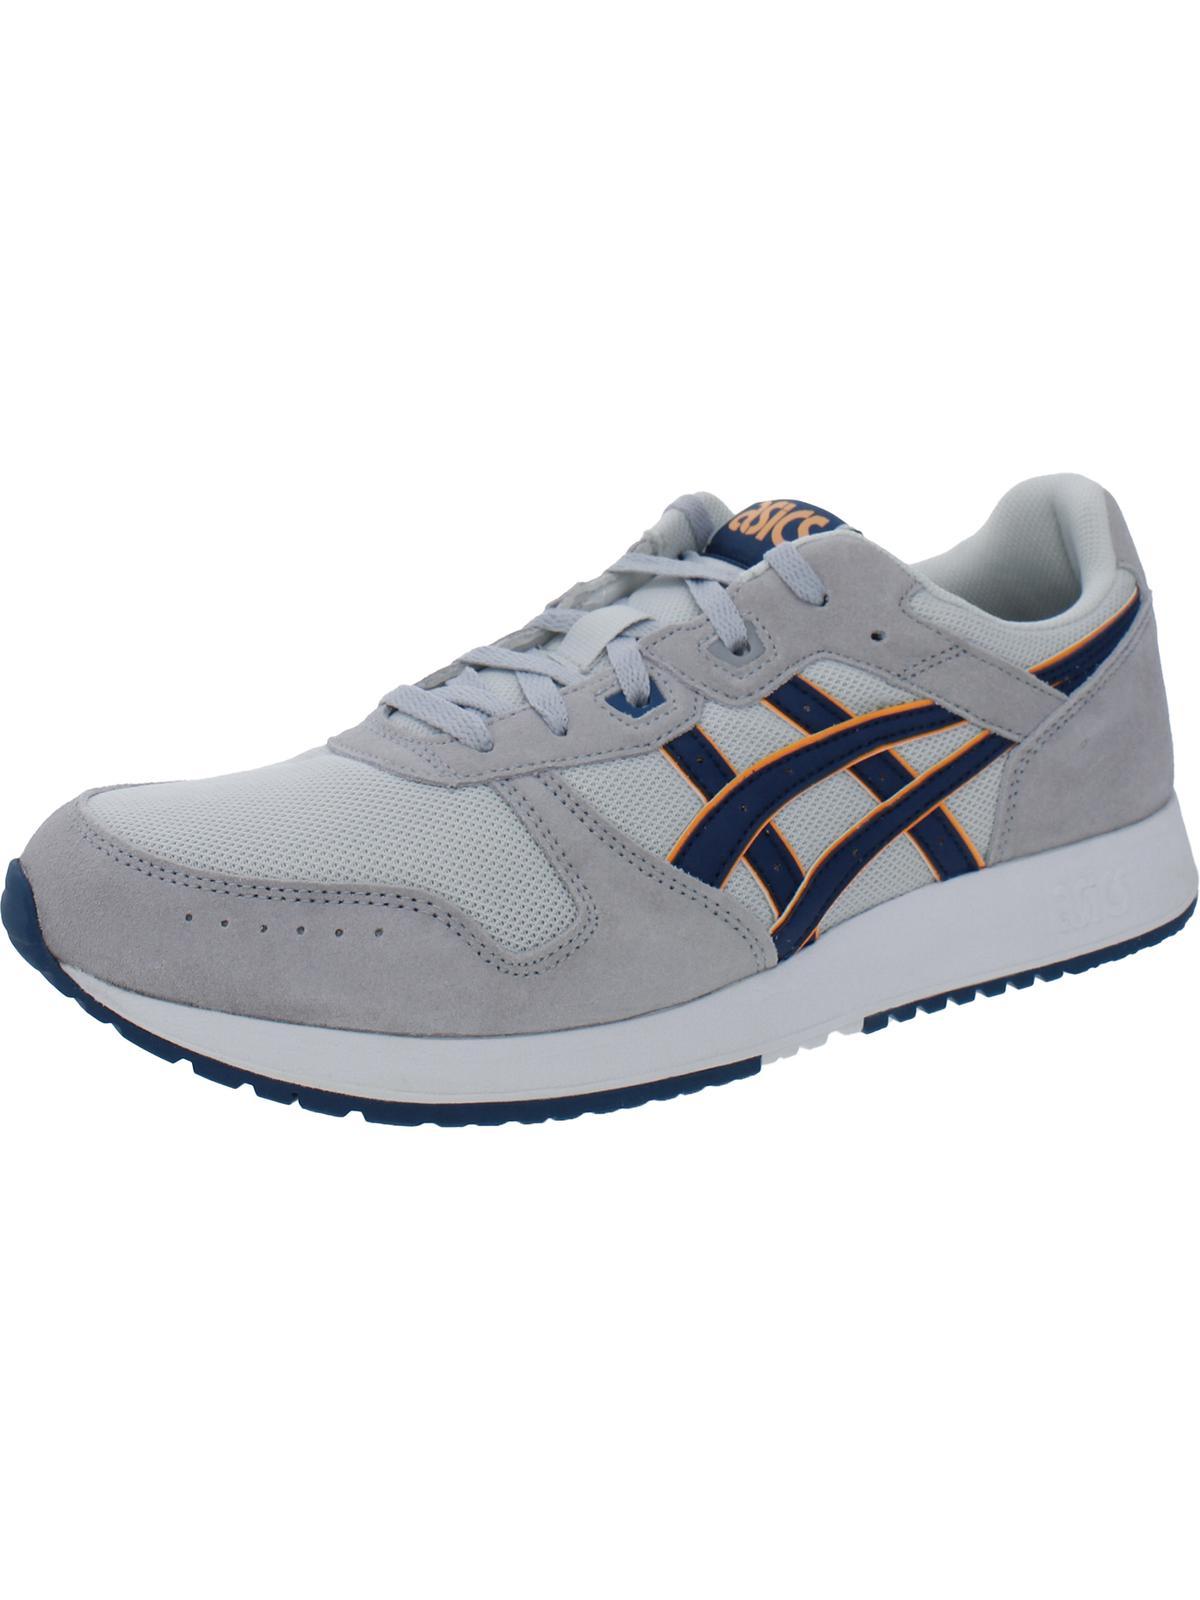 Asics Lyte Classic Trainers Lifestyle Running Shoes in Gray for Men | Lyst